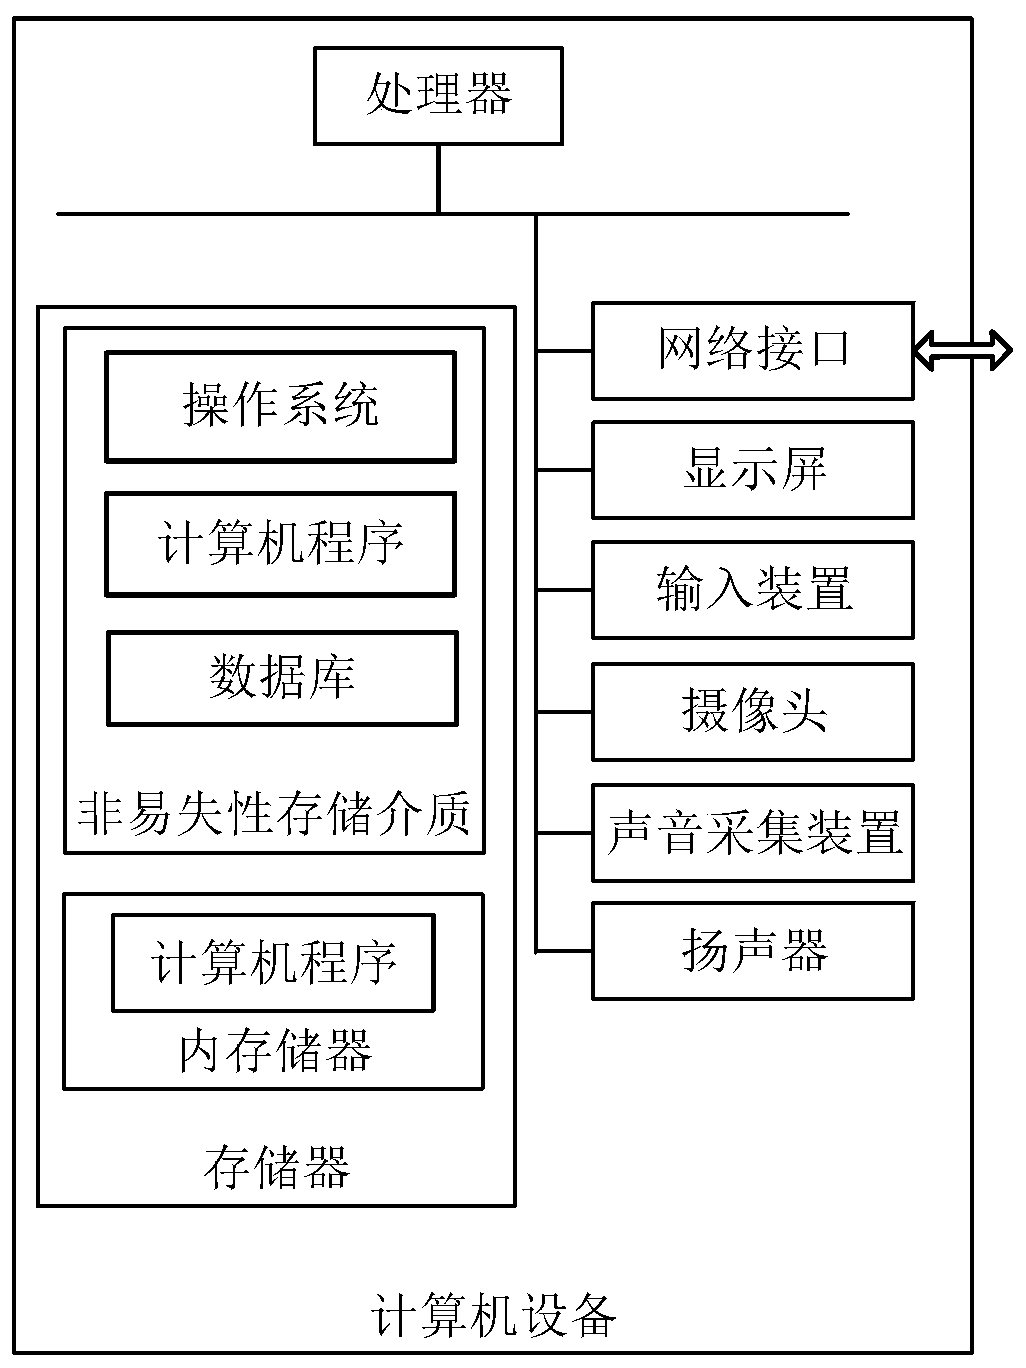 Unmanned vehicle formation scheduling method, device and system and computer equipment